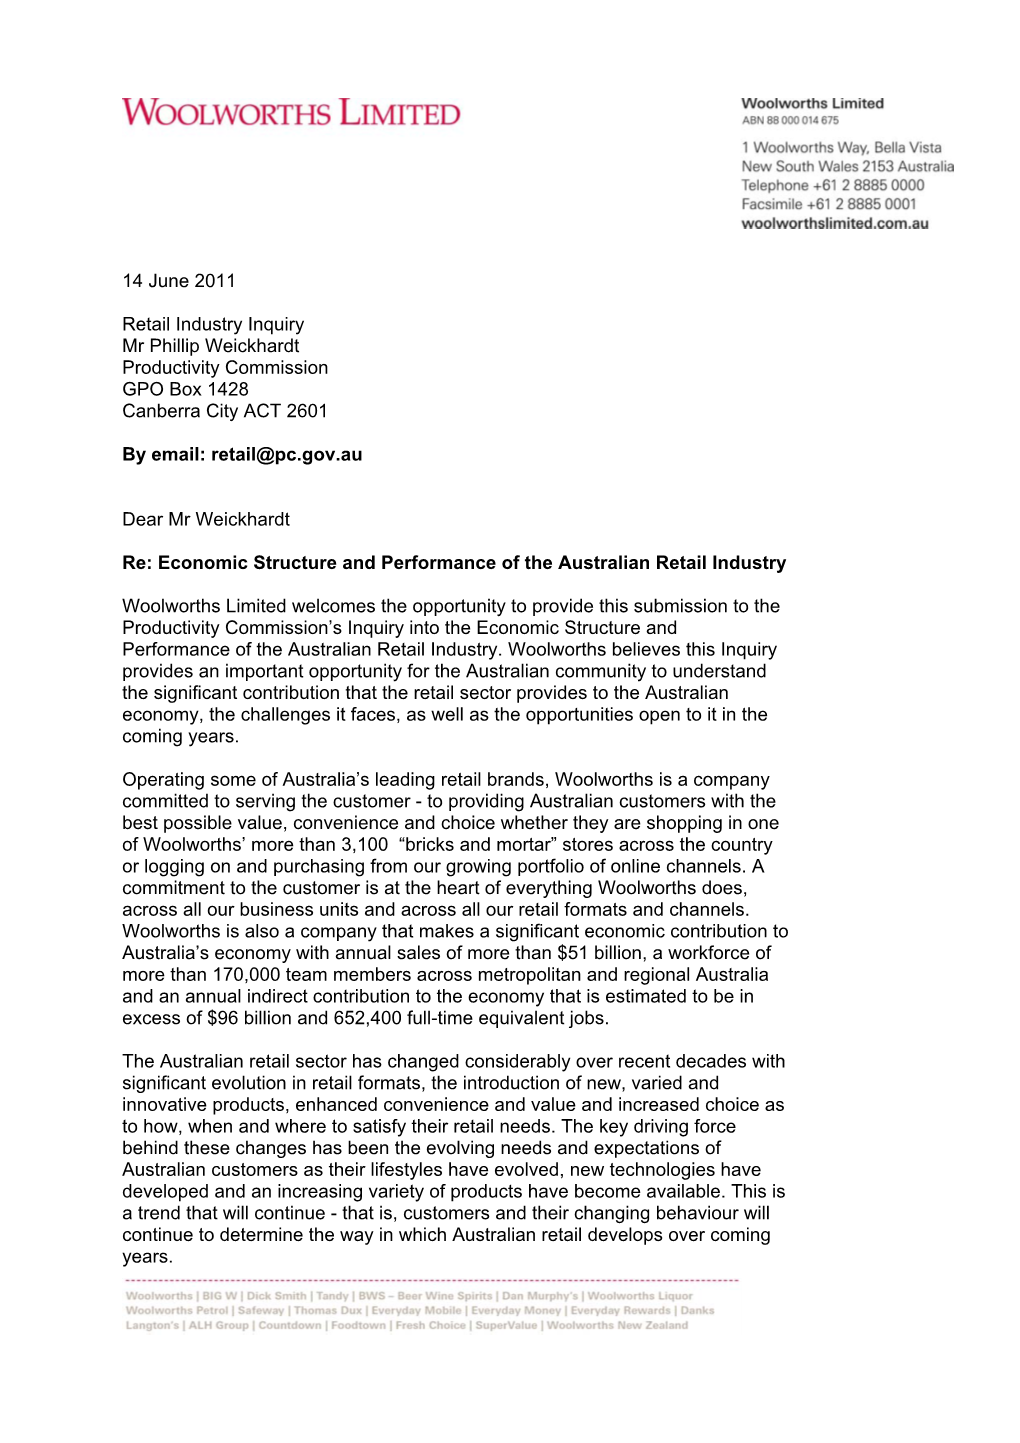 Submission to the Productivity Commission’S Inquiry Into the Economic Structure and Performance of the Australian Retail Industry